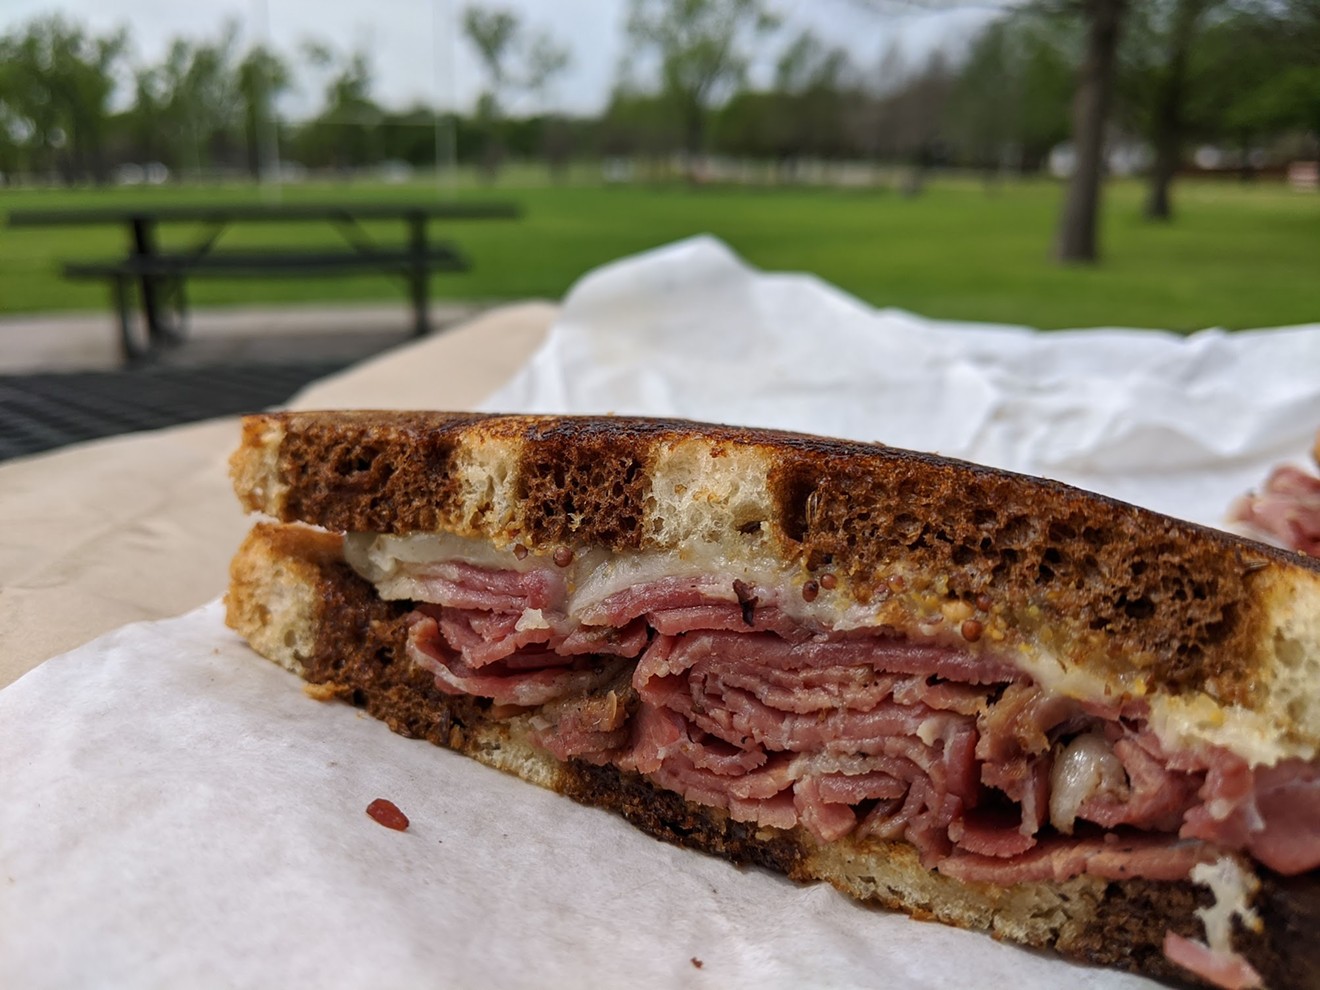 No trading lunches here; Goodfriend Package's pastrami is a keeper.